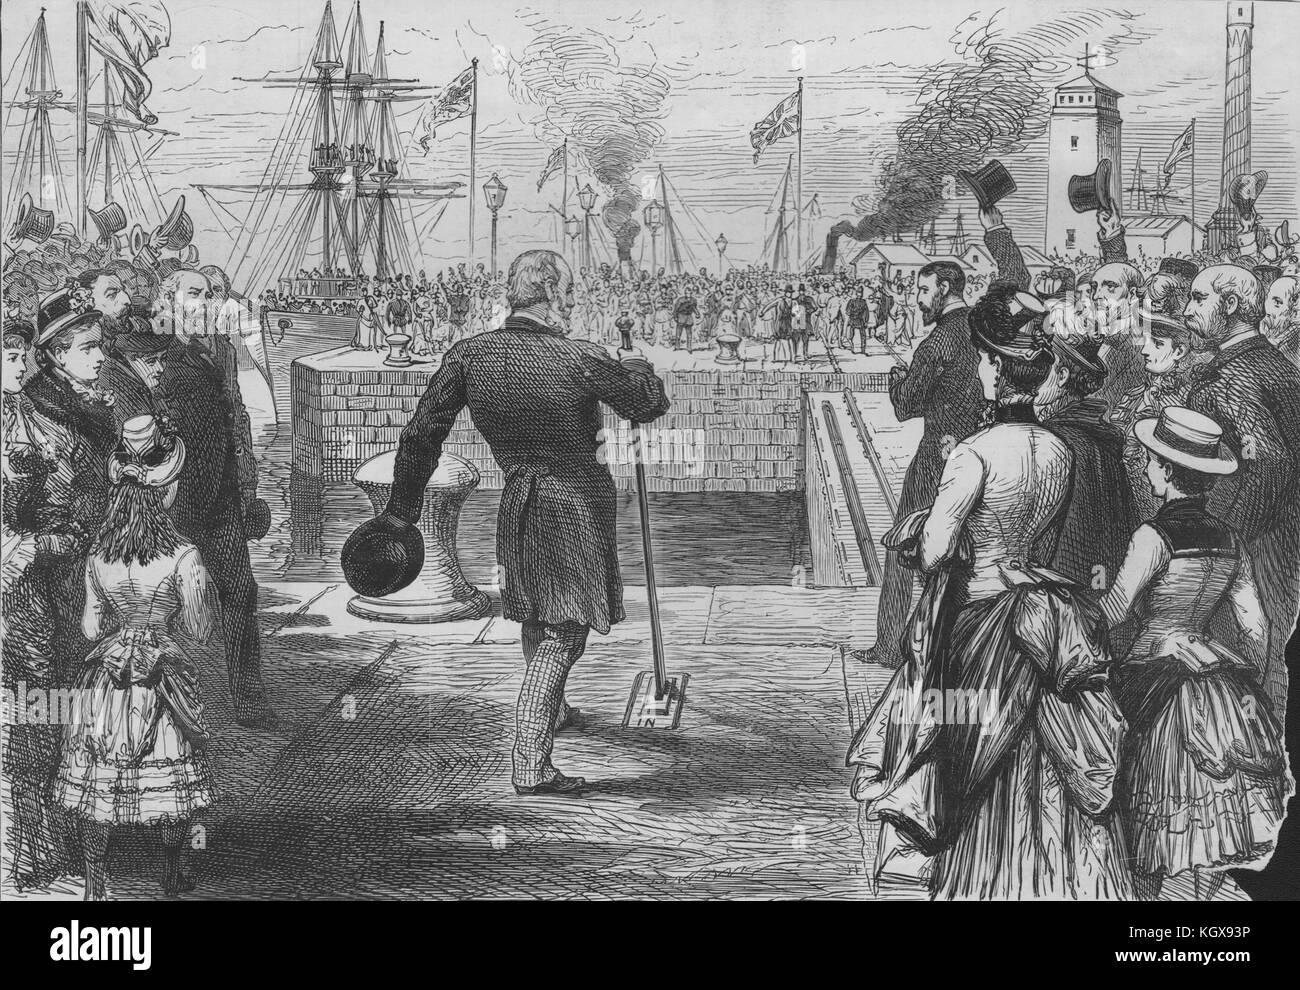 Opening of the James Watt Dock by the Provost of Greenock. Scotland 1886. The Illustrated London News Stock Photo